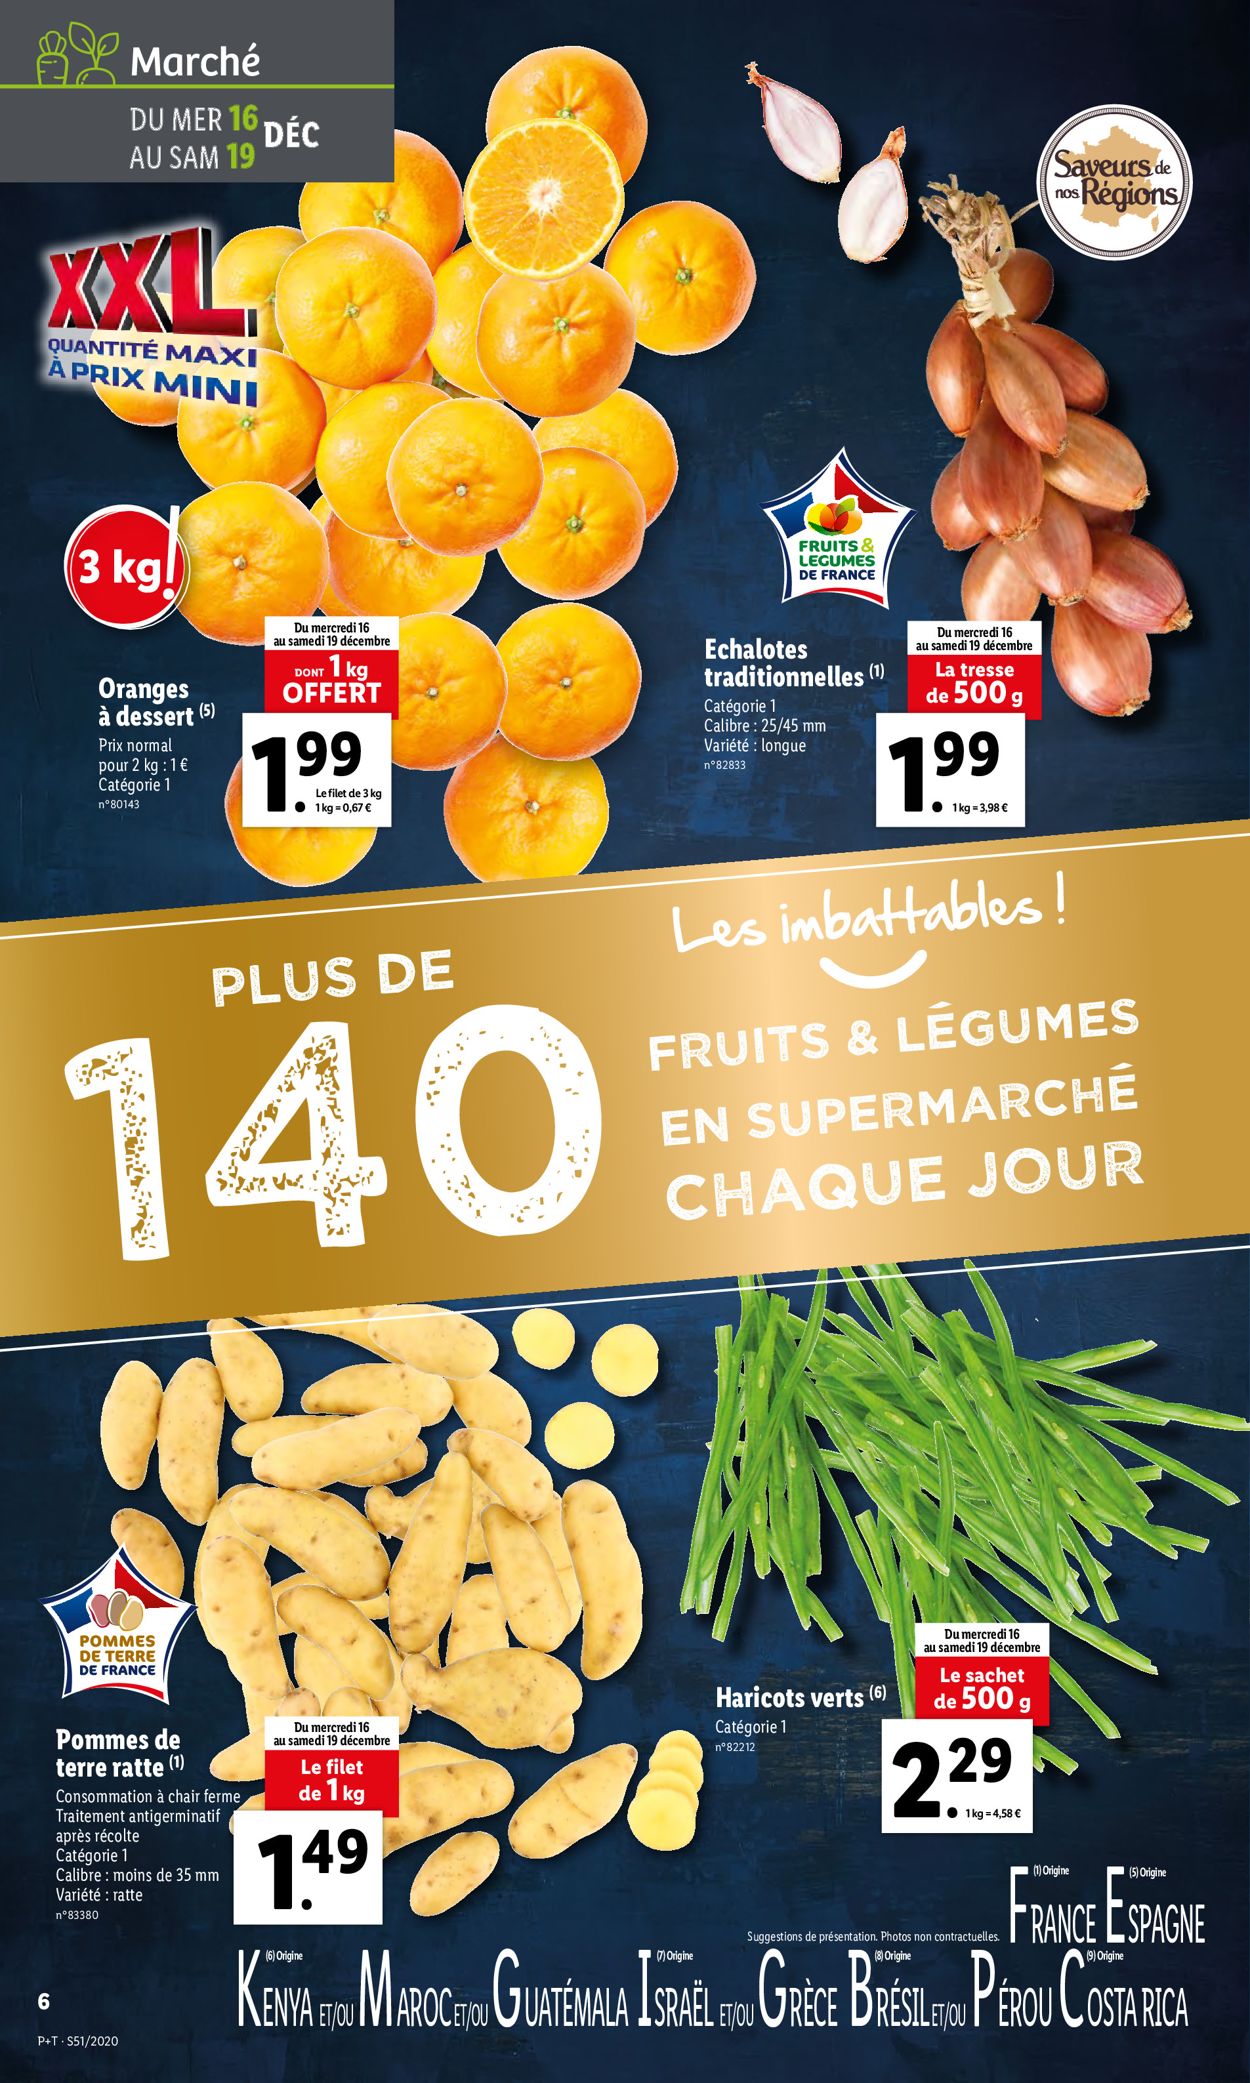 Lidl Catalogue - 16.12-22.12.2020 (Page 6)